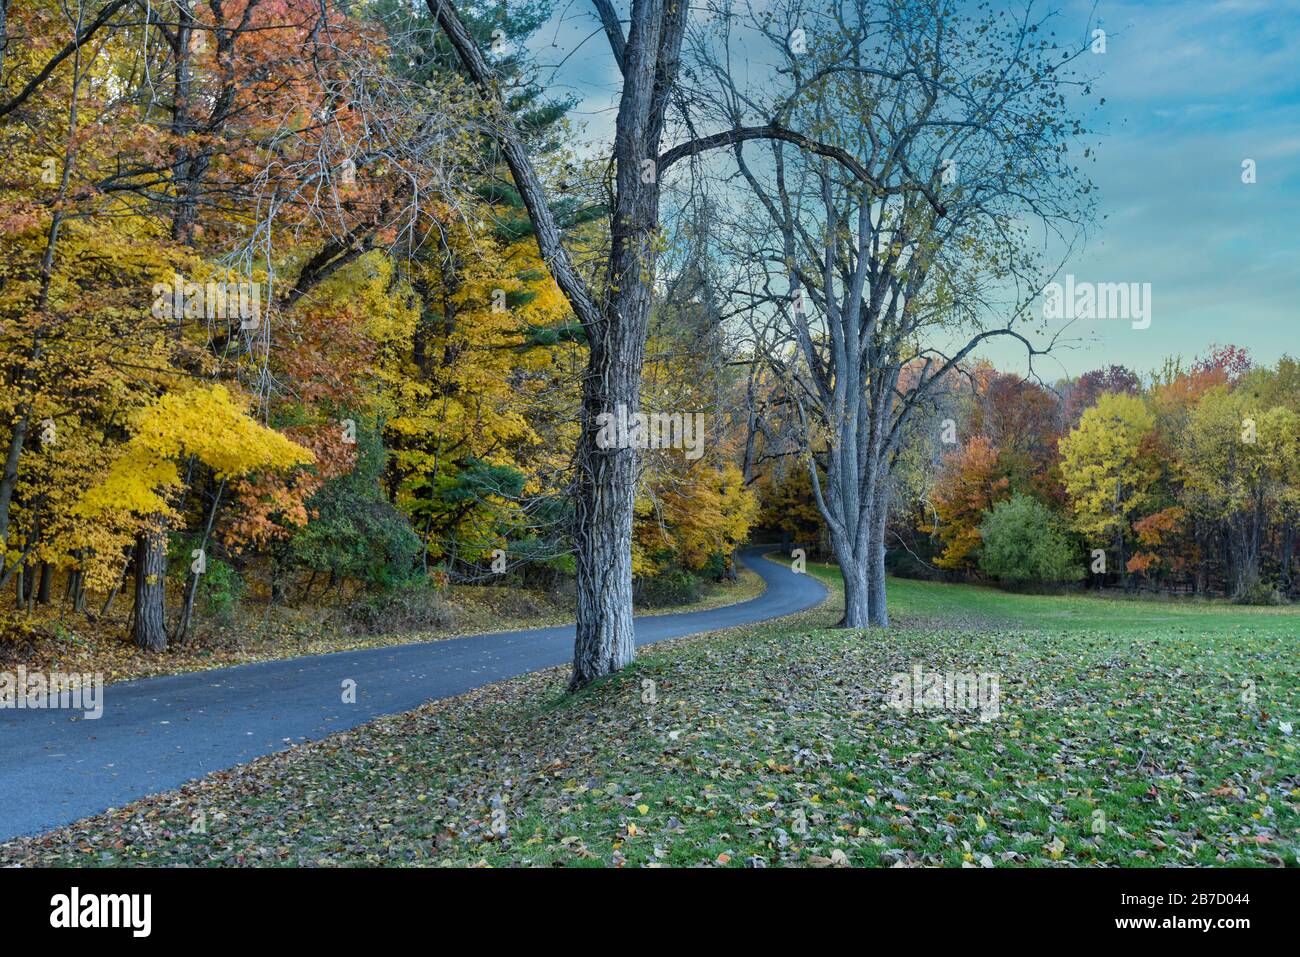 A winding country road weaves through colorful autumn trees. Stock Photo